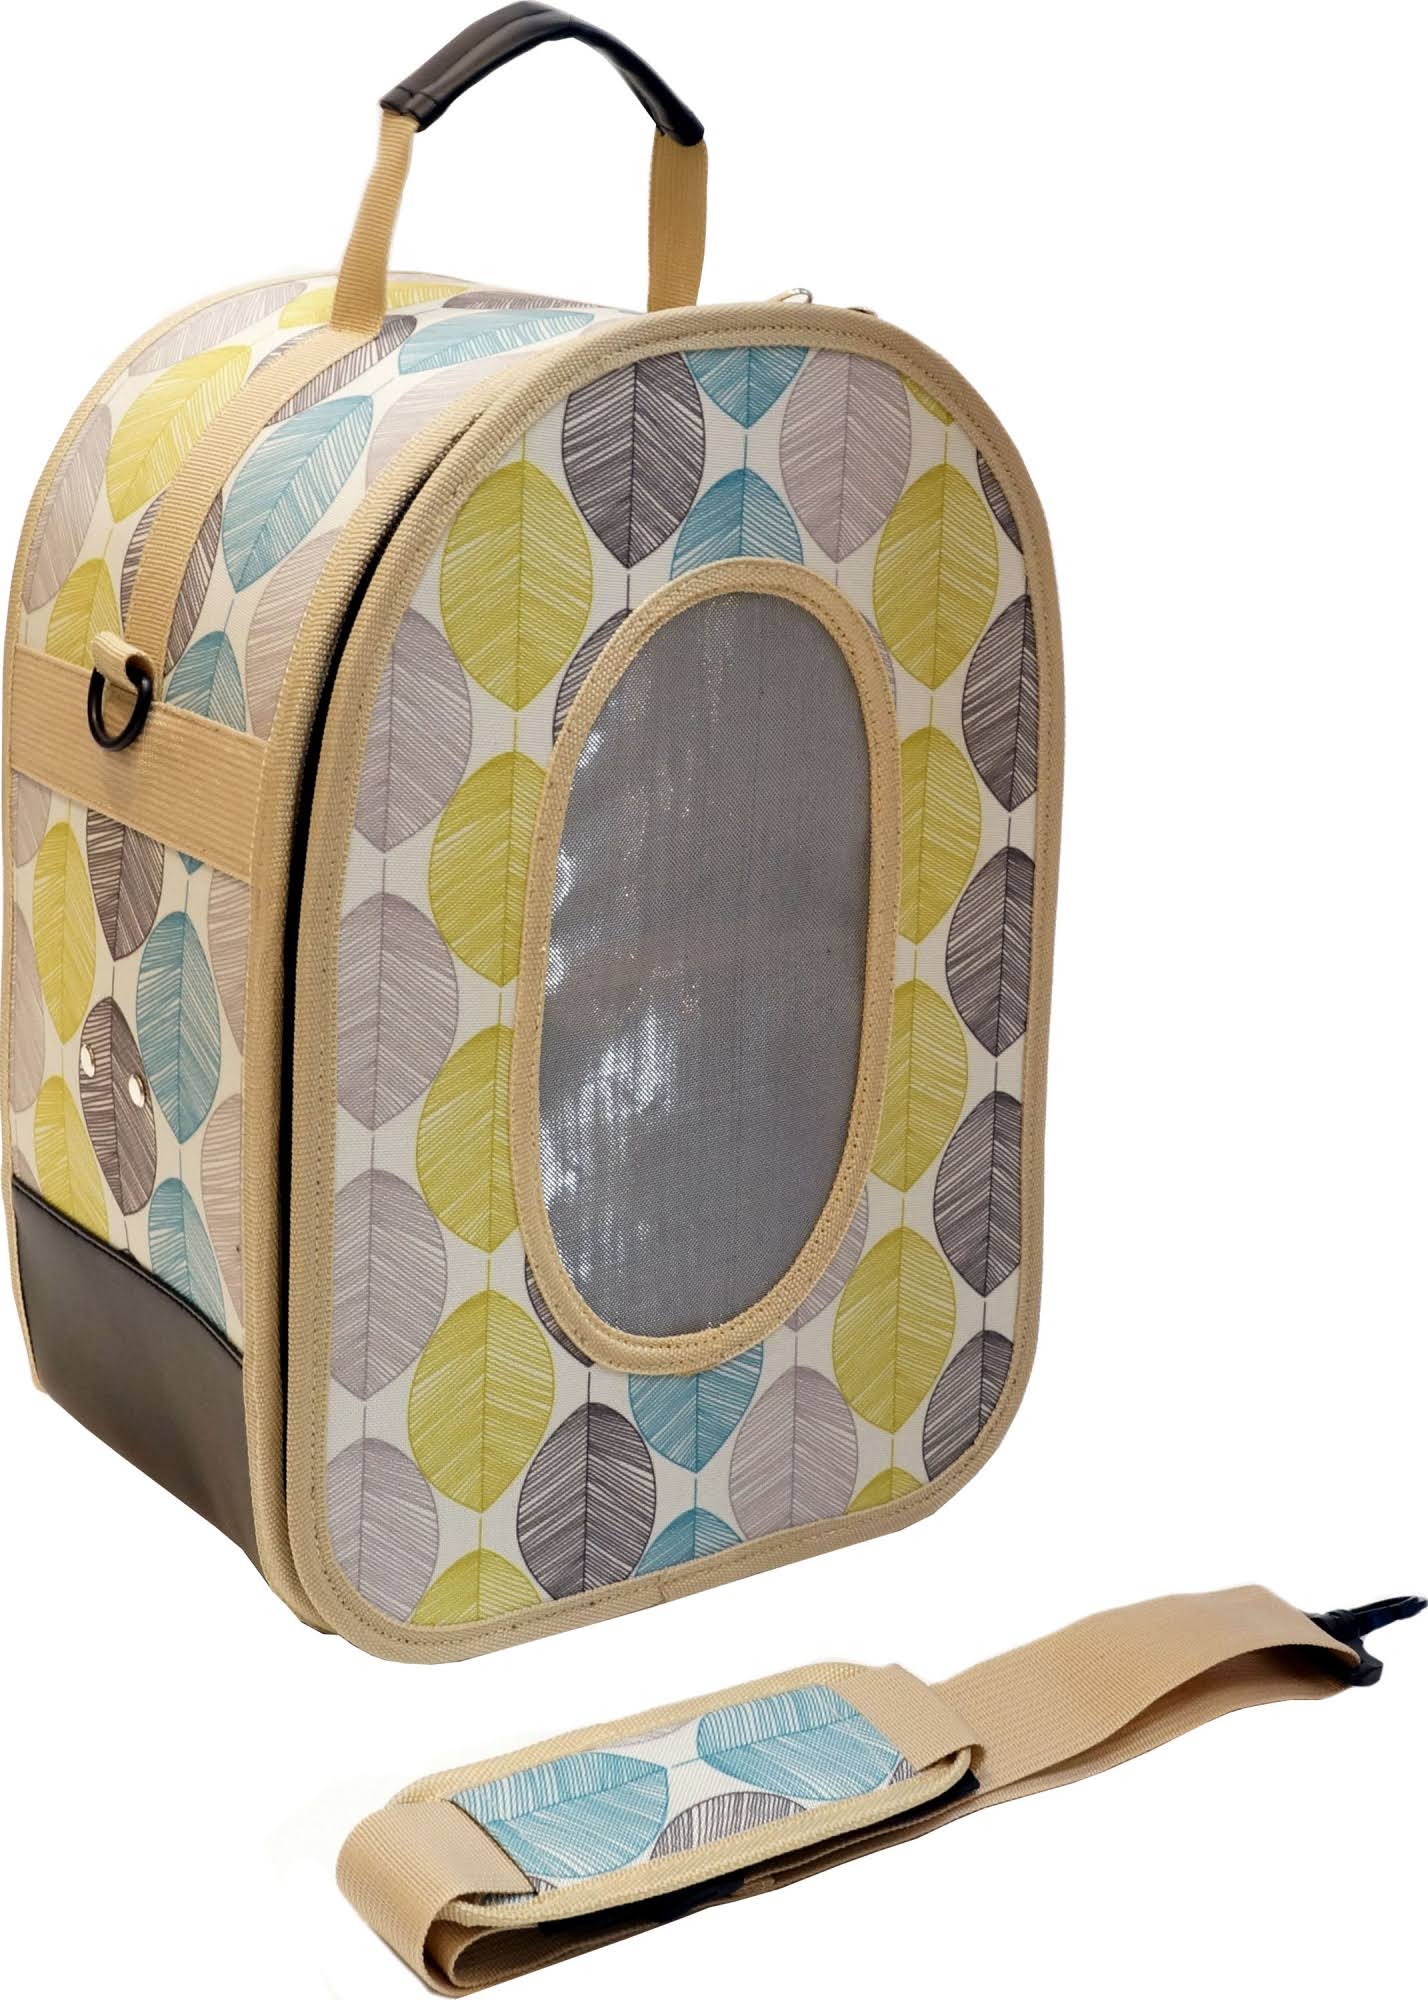 A&E Soft Sided Travel Carrier for Birds